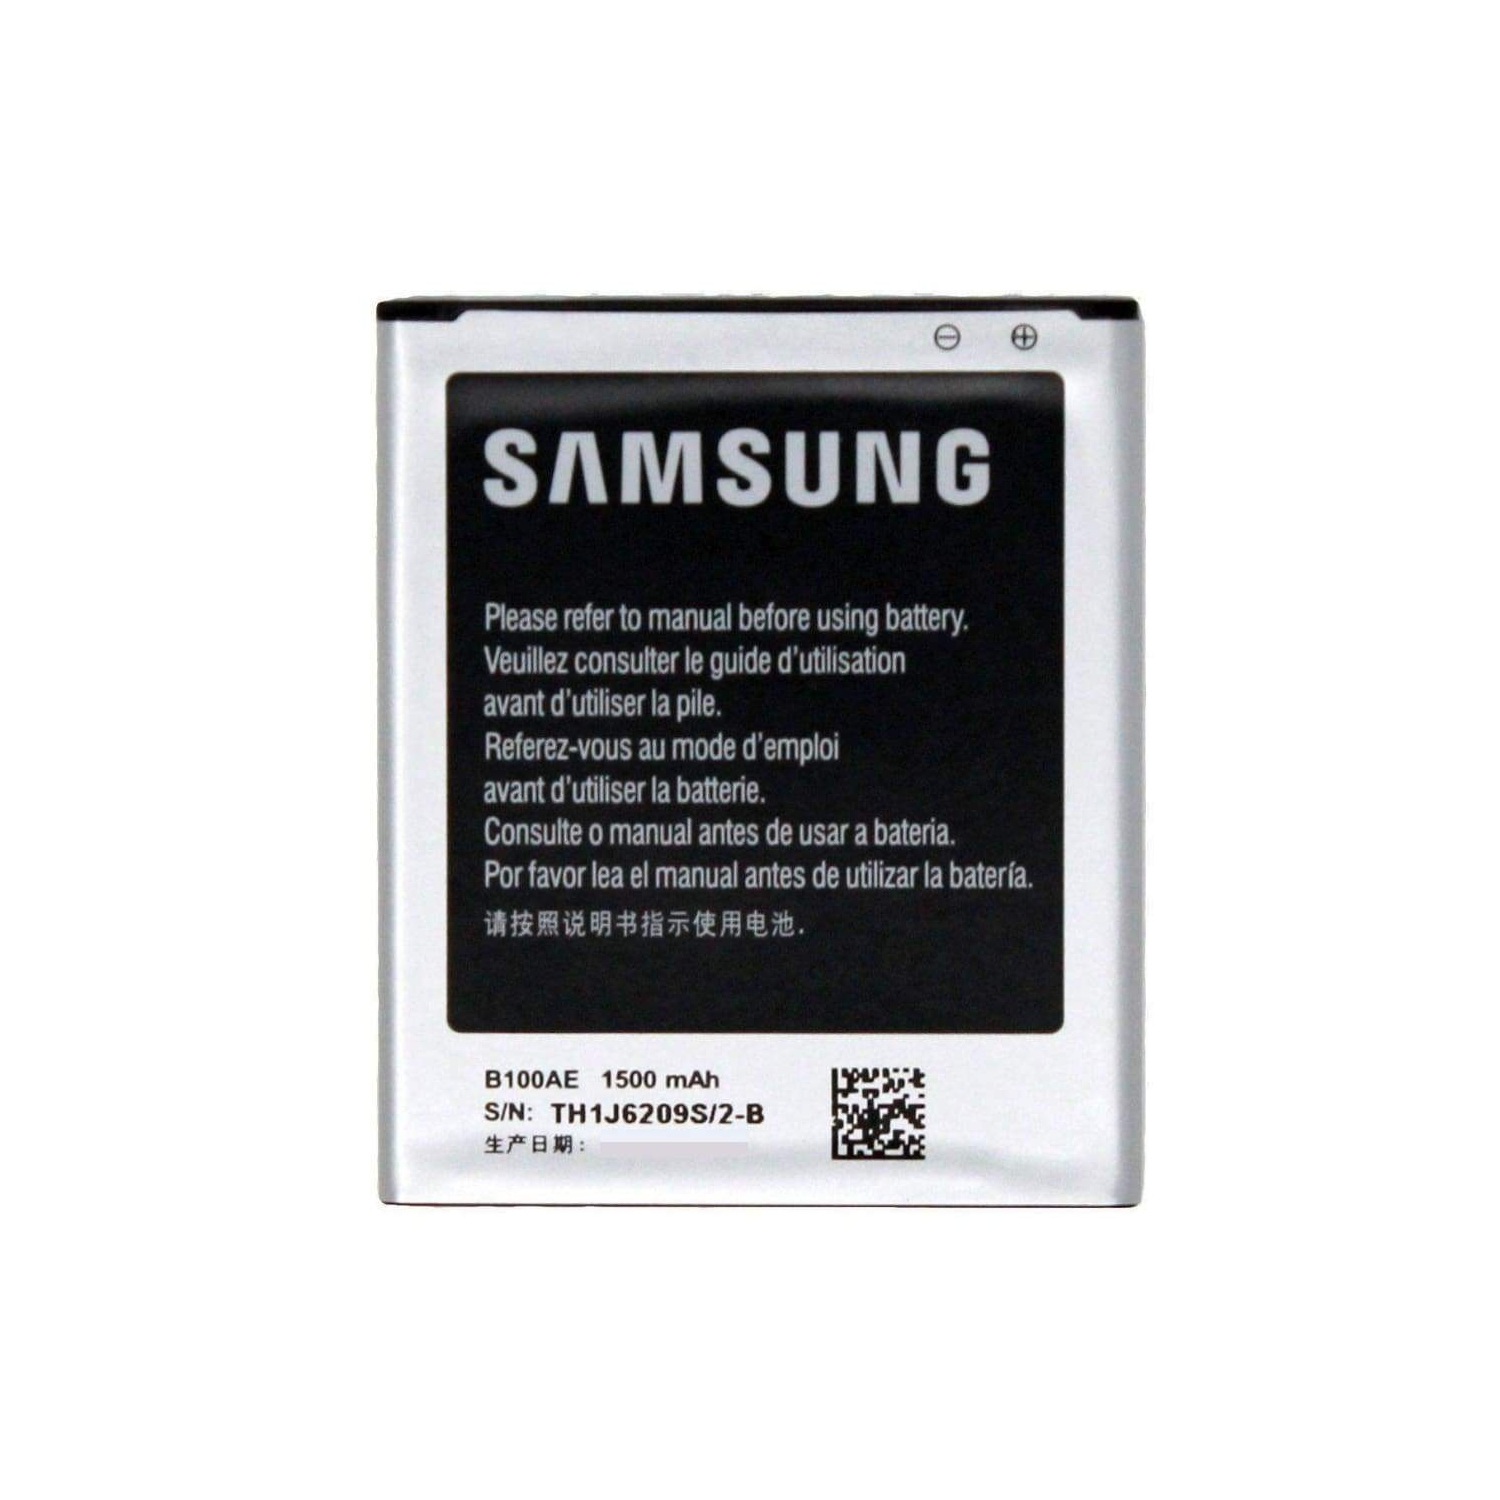 OEM Samsung Galaxy B100AE Battery for S7898 Trend II S7568I Trend S7562C Duos